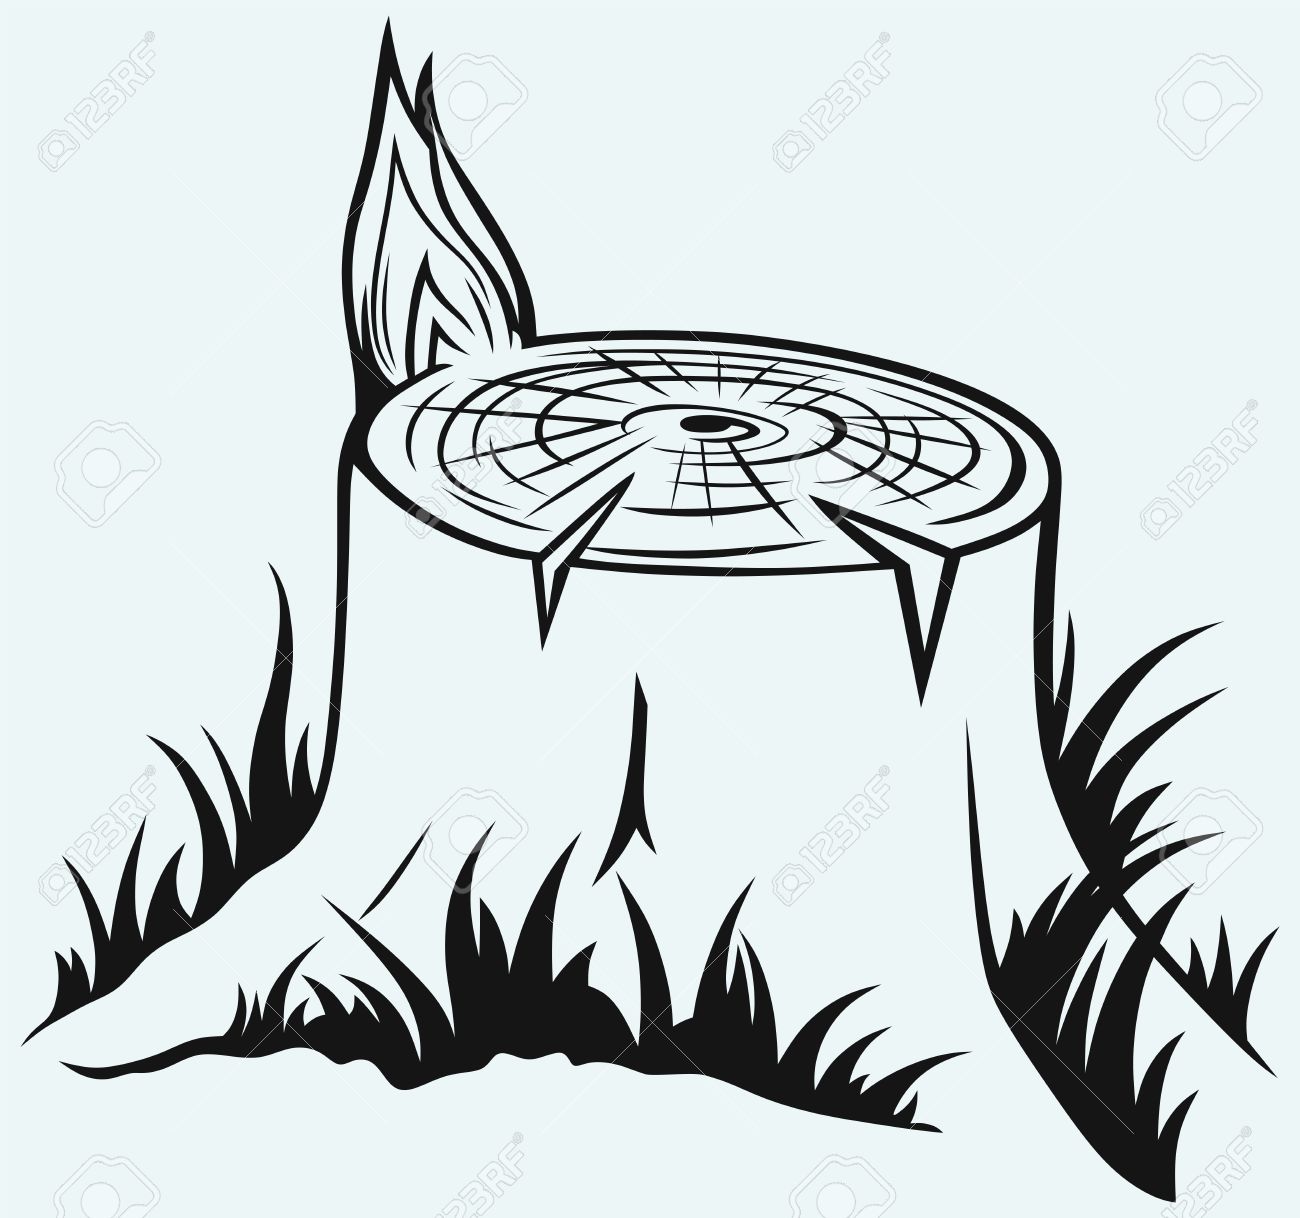 Stump clipart #10, Download drawings